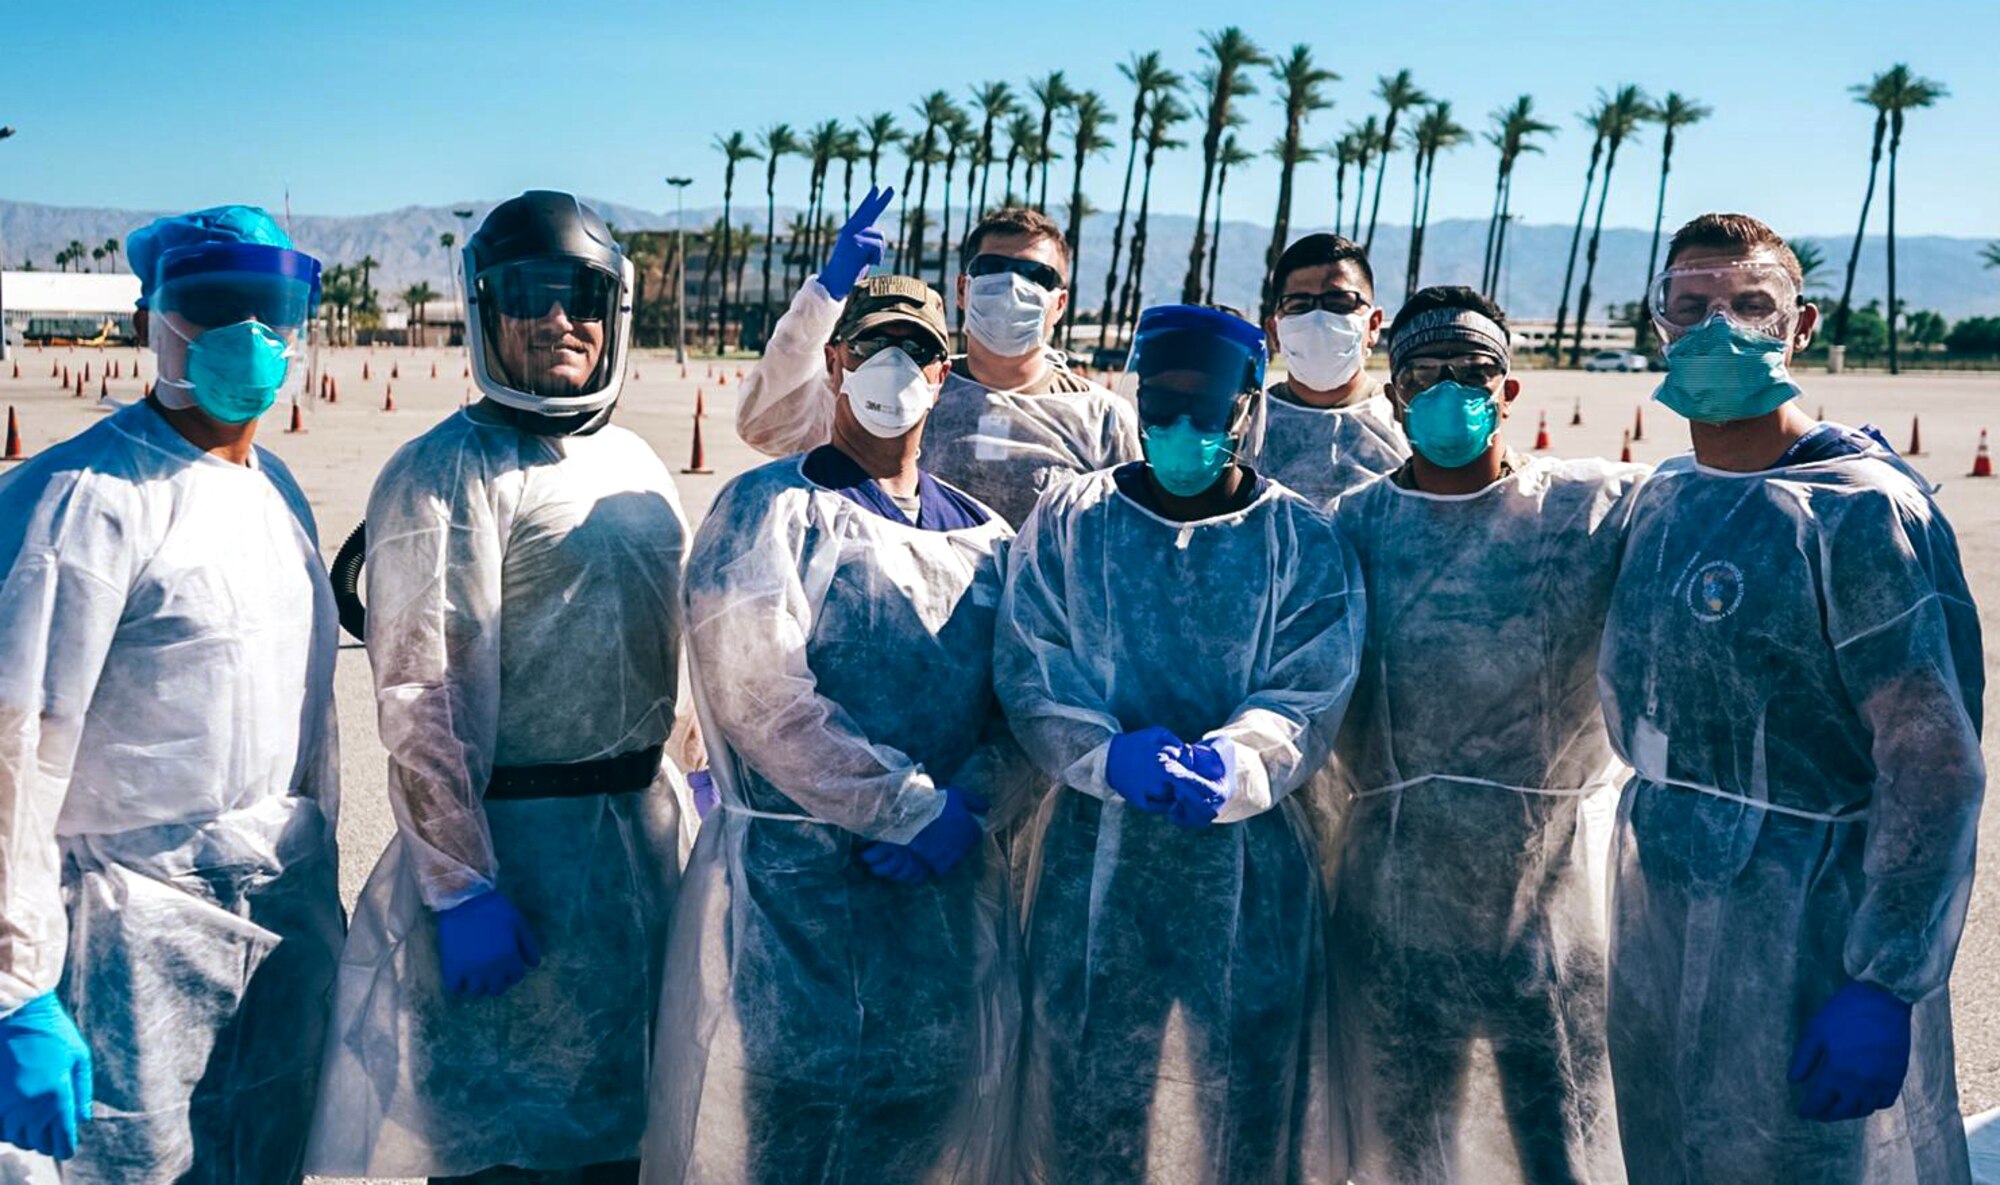 U.S. Air Force Capt. McGar (second from the left) stands with his fellow 144th Fighter Wing medical strike team members at a COVID-19 drive-thru testing site in Indio, Calif.